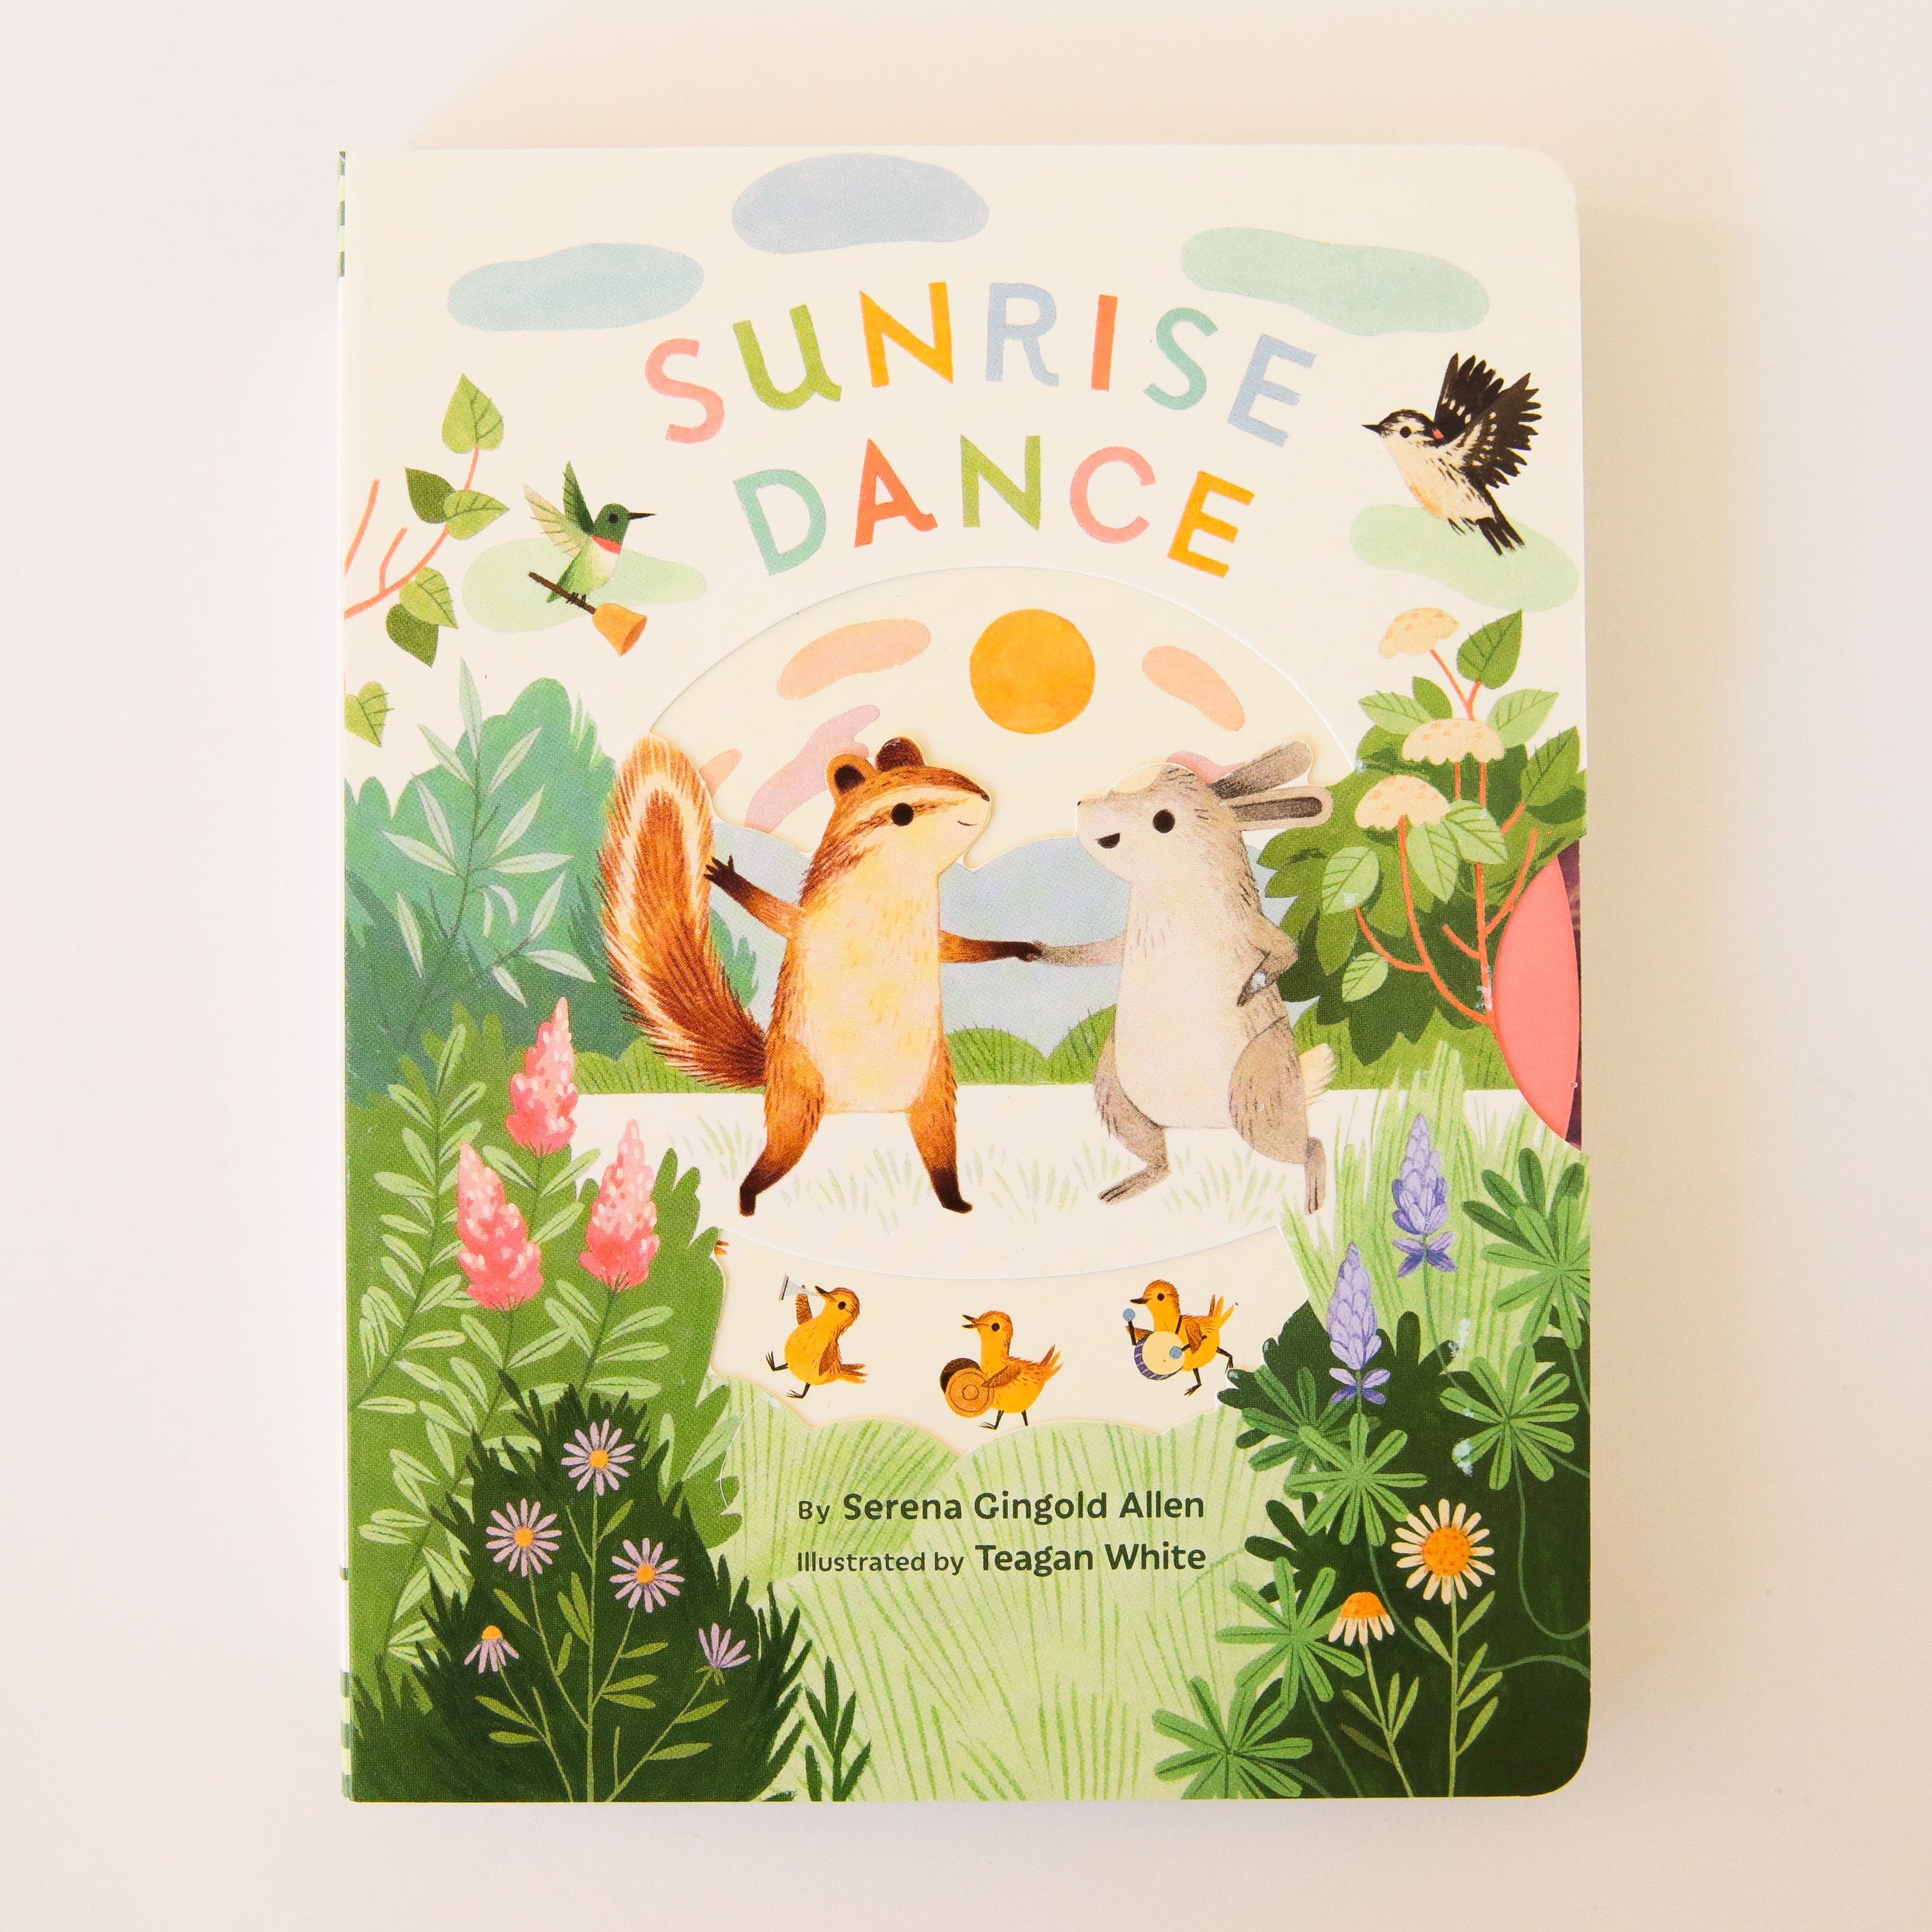 Hardcover children's book titled 'Sunrise Dance' in colorful lettering. Below the title is a spring themed scene of animals dancing in a grass field. Animals include a squirrel and bunny holding hands, instrument playing ducklings and more. 